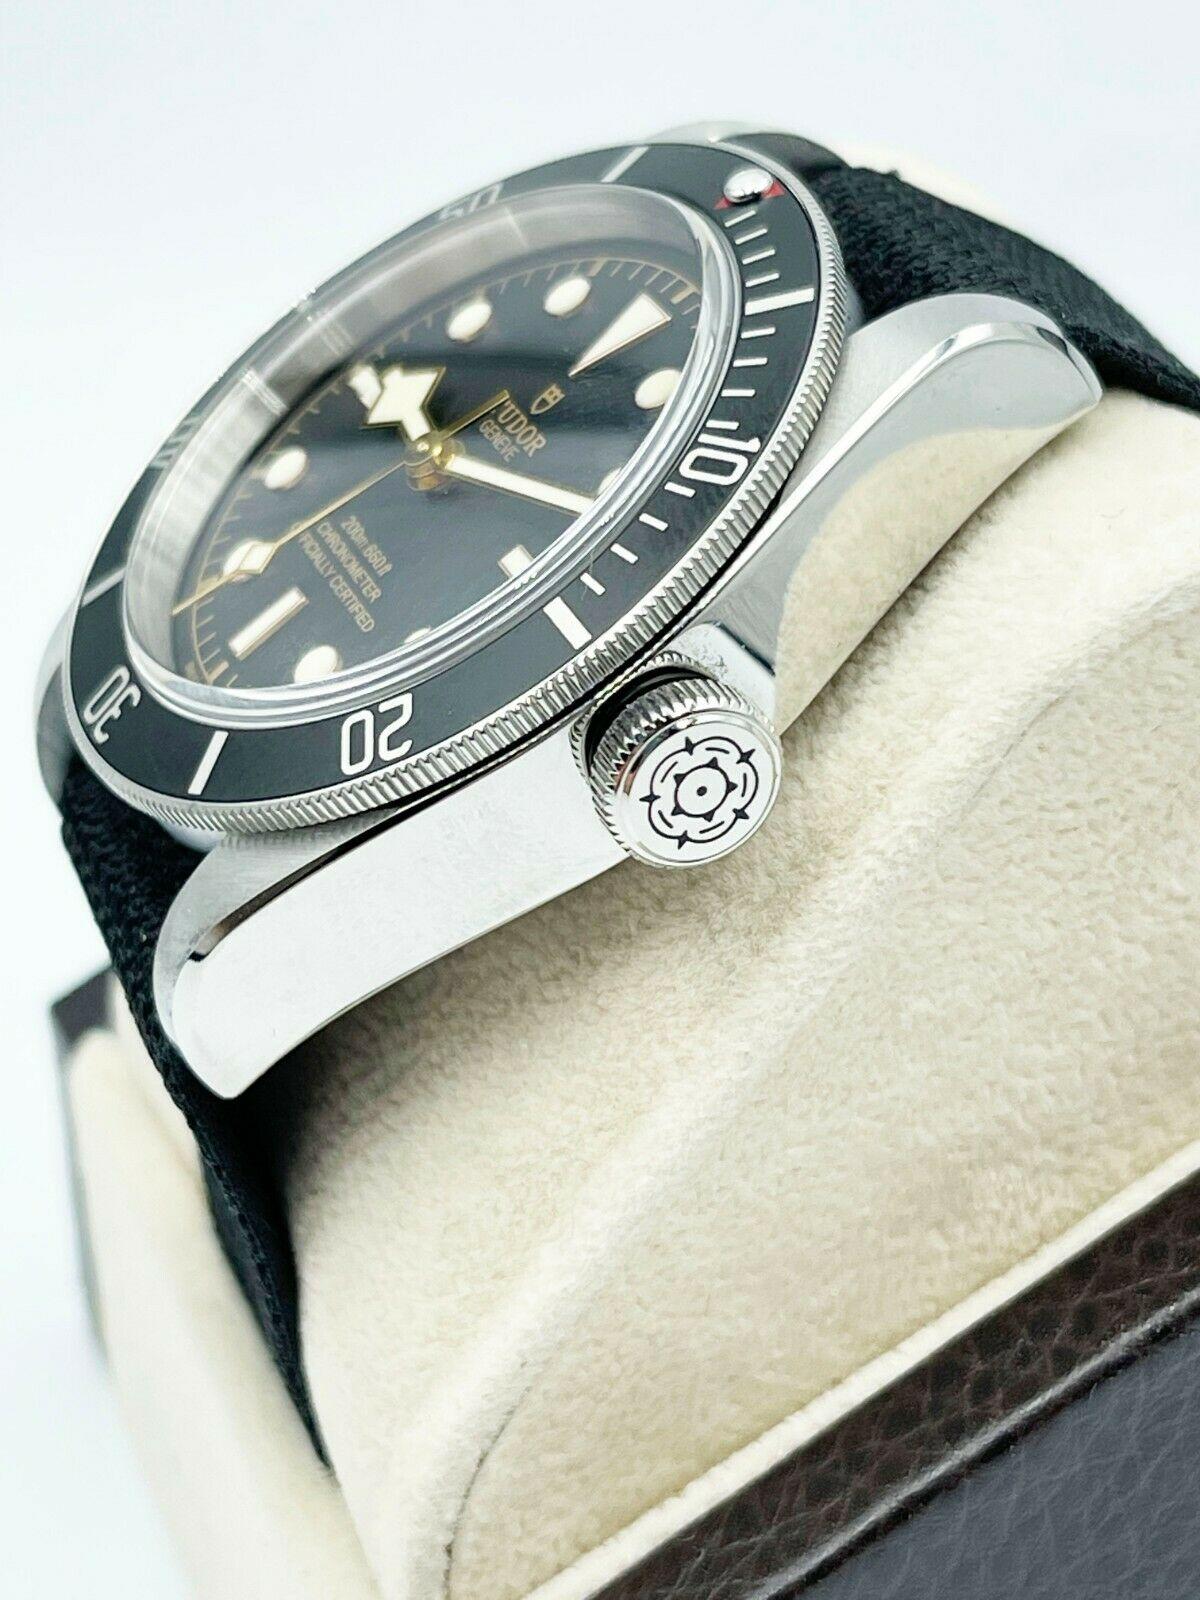 Tudor Black Bay 79230N Stainless Steel Fabric Strap Box Papers 2019 In Excellent Condition For Sale In San Diego, CA